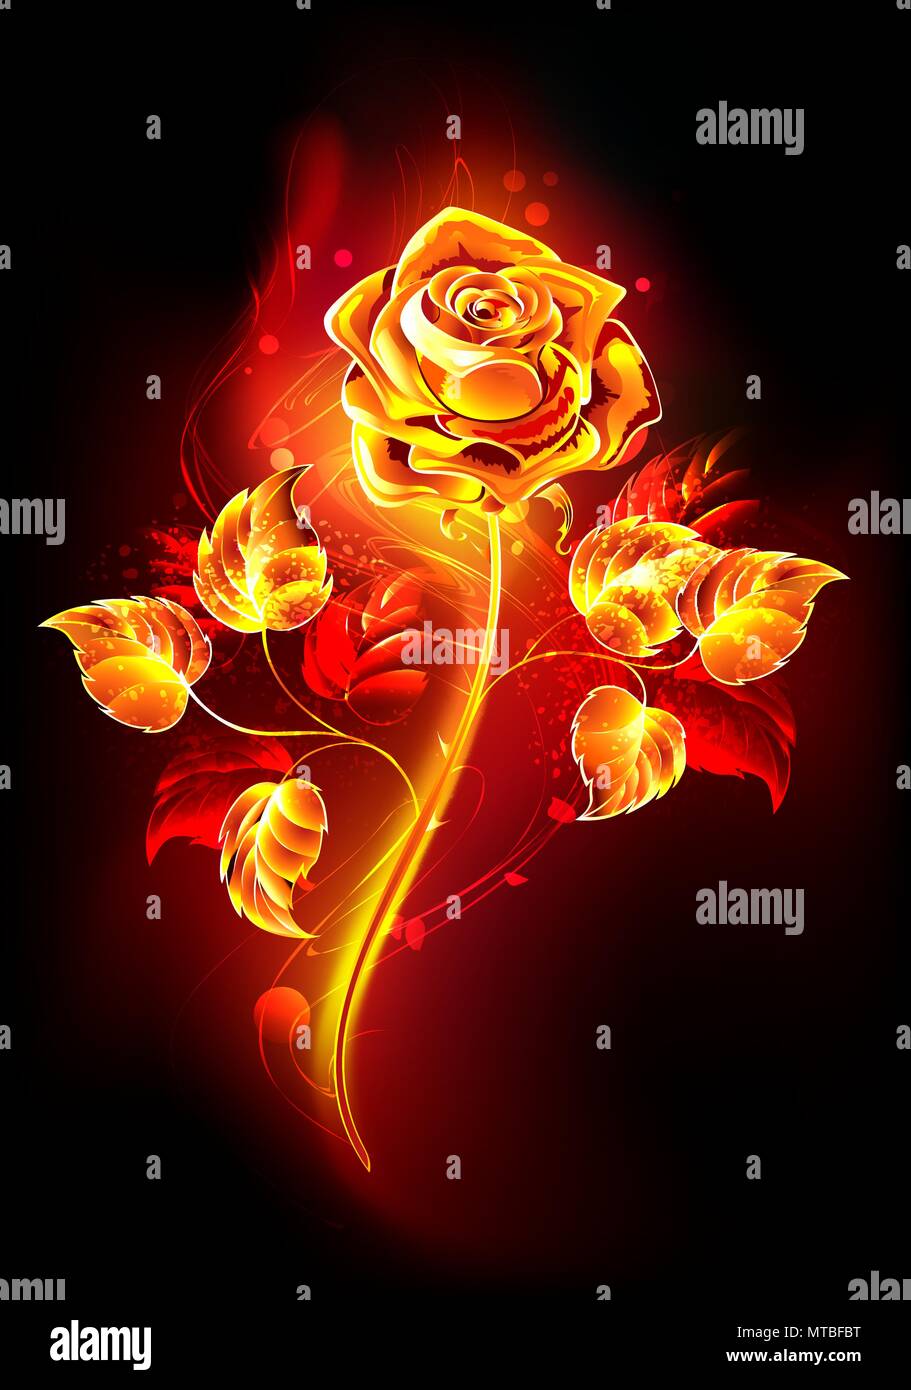 Blooming rose with  long stem and leaves from hot flame on  black background. Stock Vector